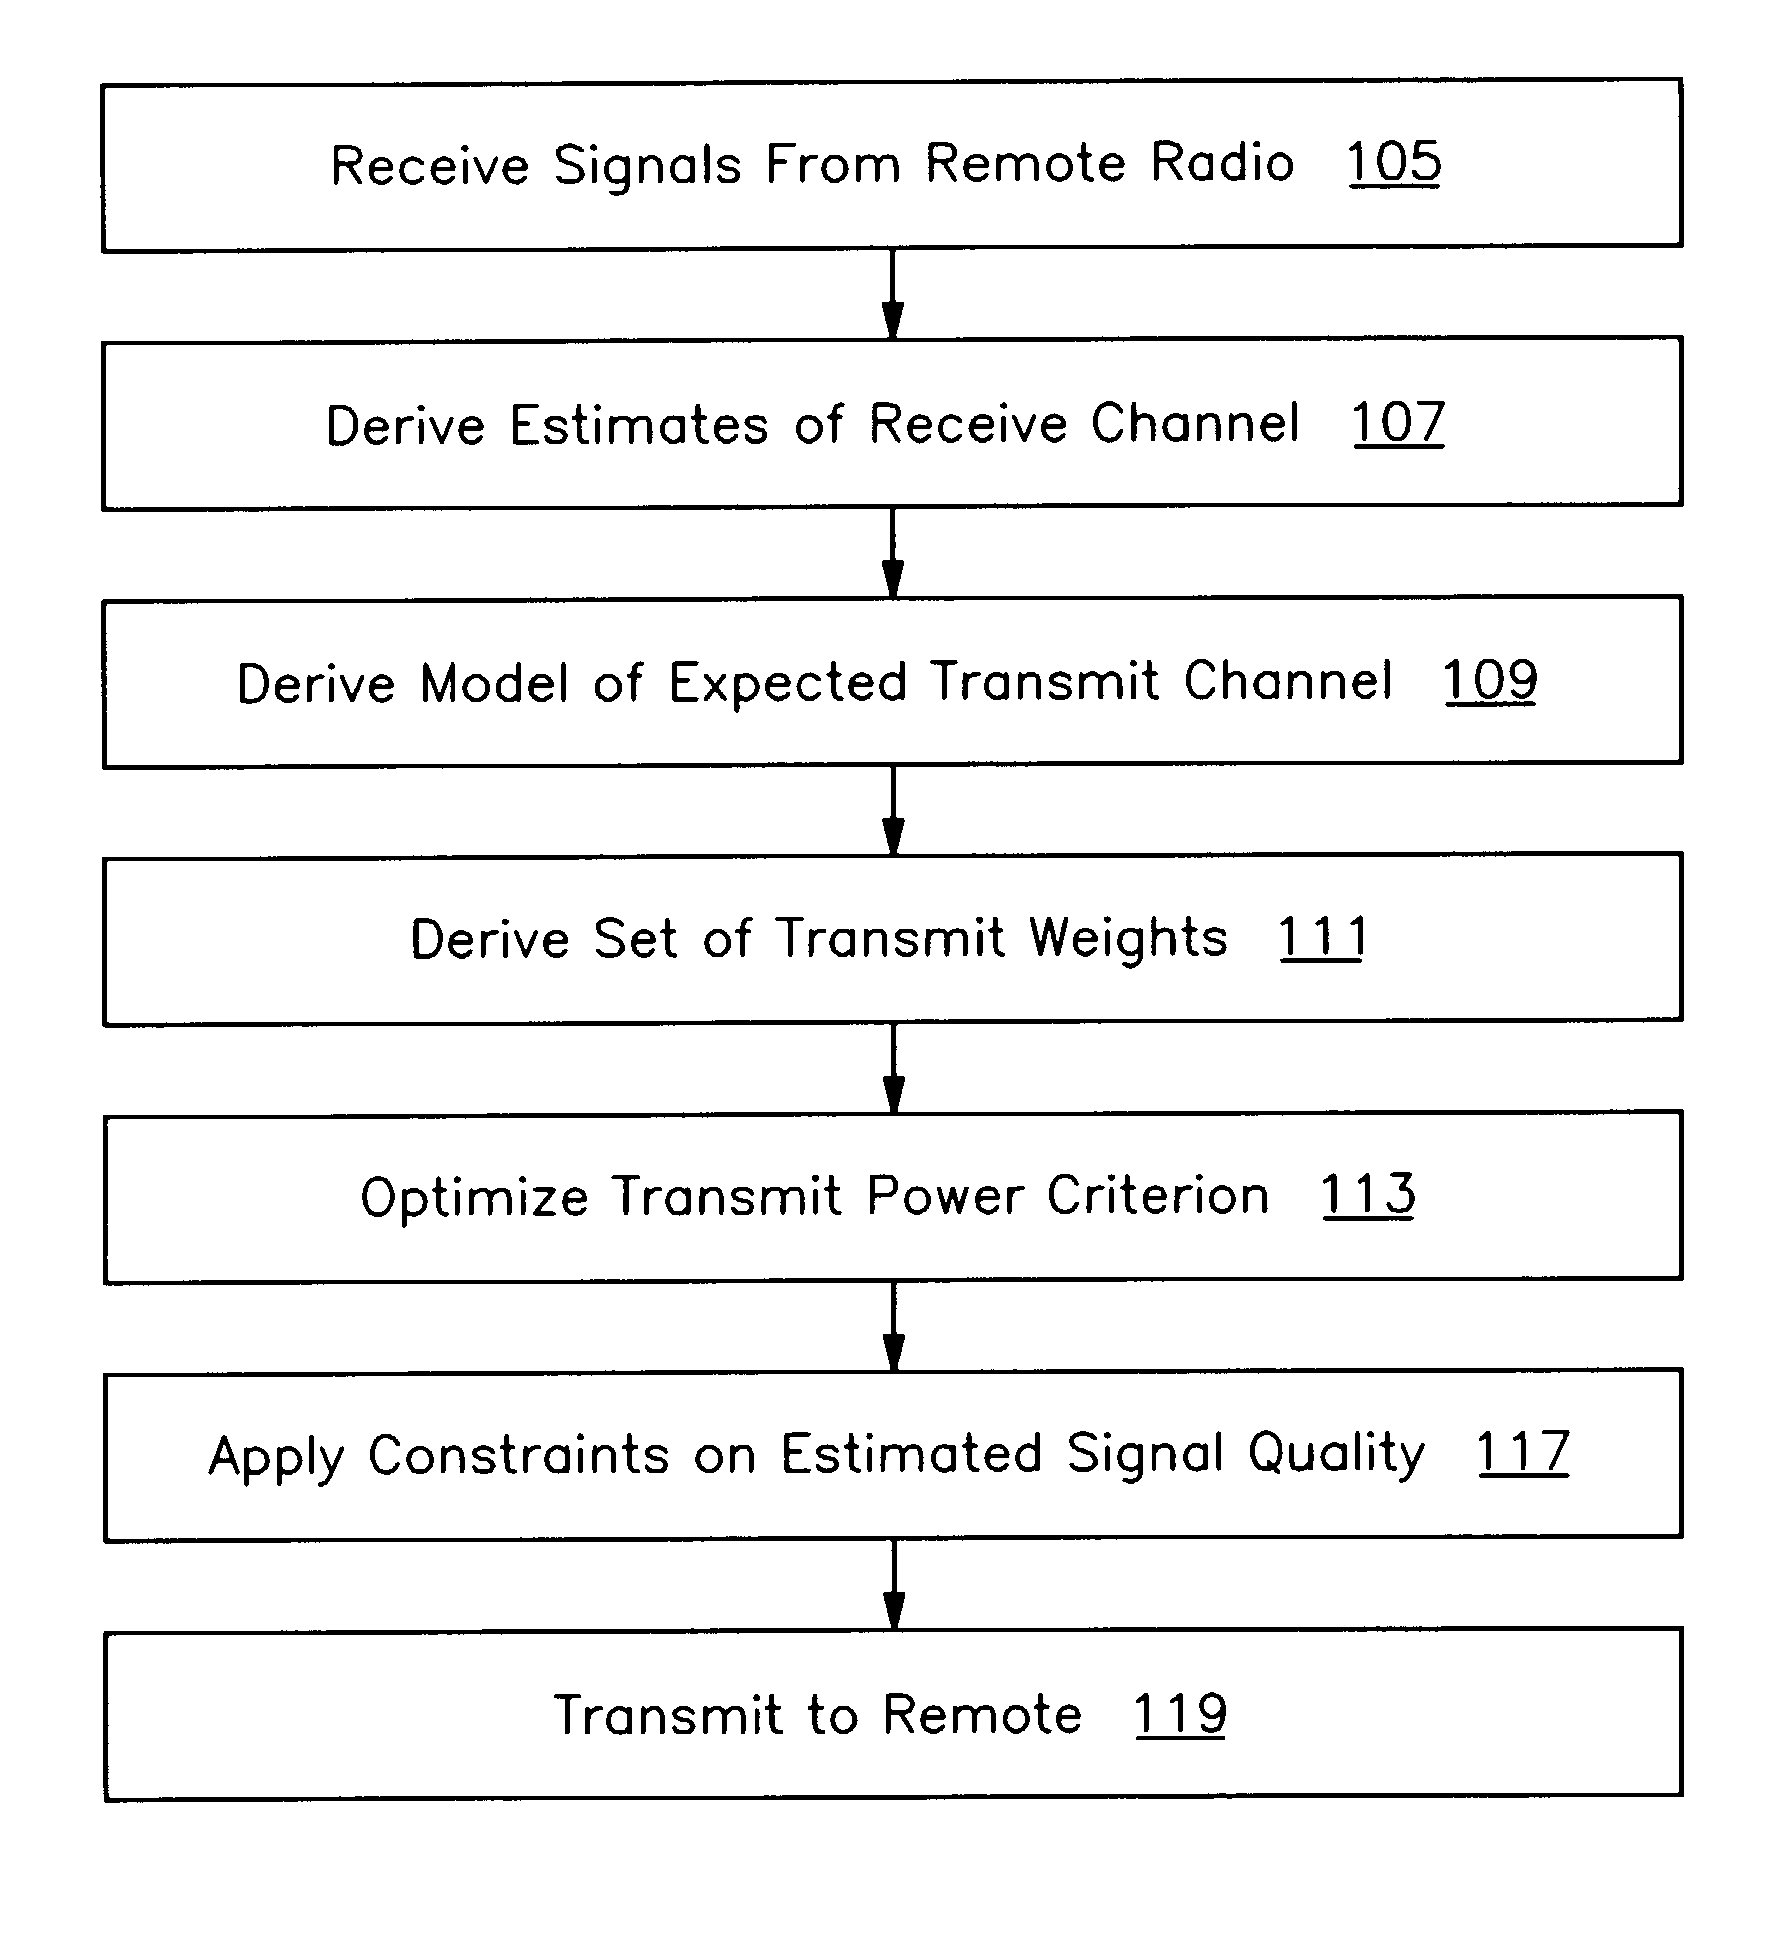 Selection of user-specific transmission parameters for optimization of transmit performance in wireless communications using a common pilot channel